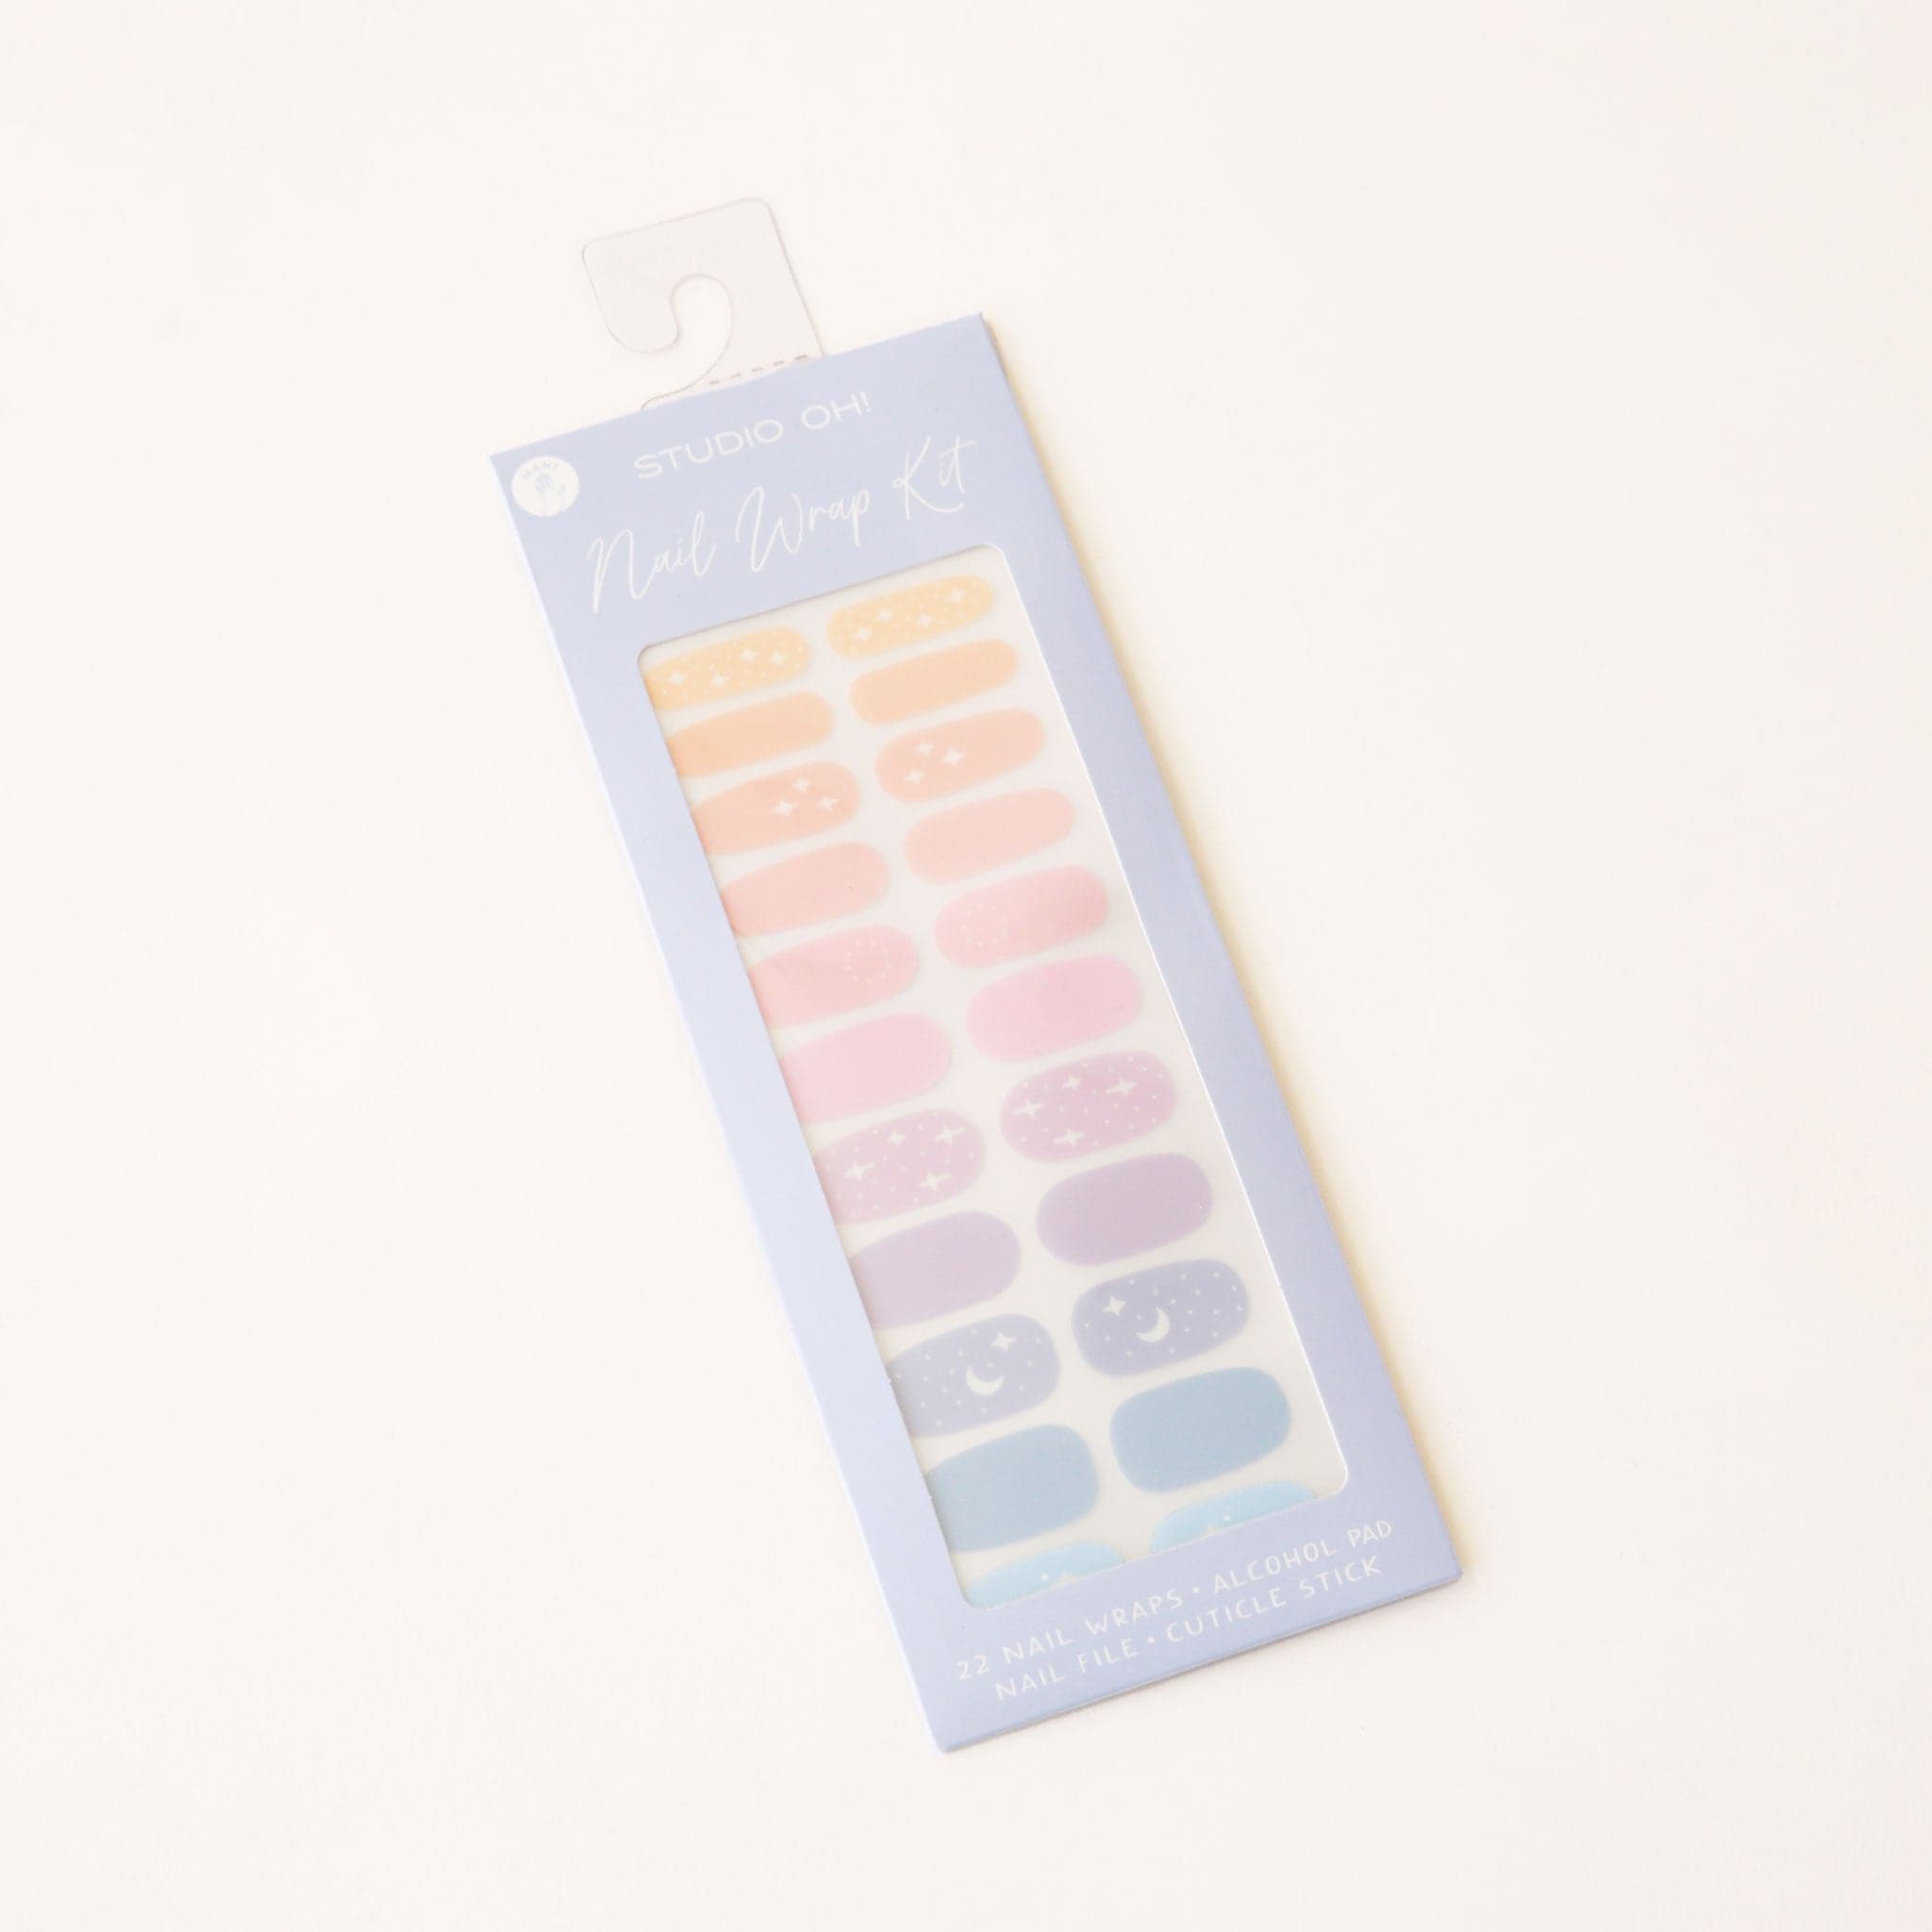 In front of a white background is a lavender rectangular shaped package. There is a clear cut out in the center with pastel nail wraps inside. The wraps are pastel blue, purple, pink and orange. Some have white moons and stars on them. 